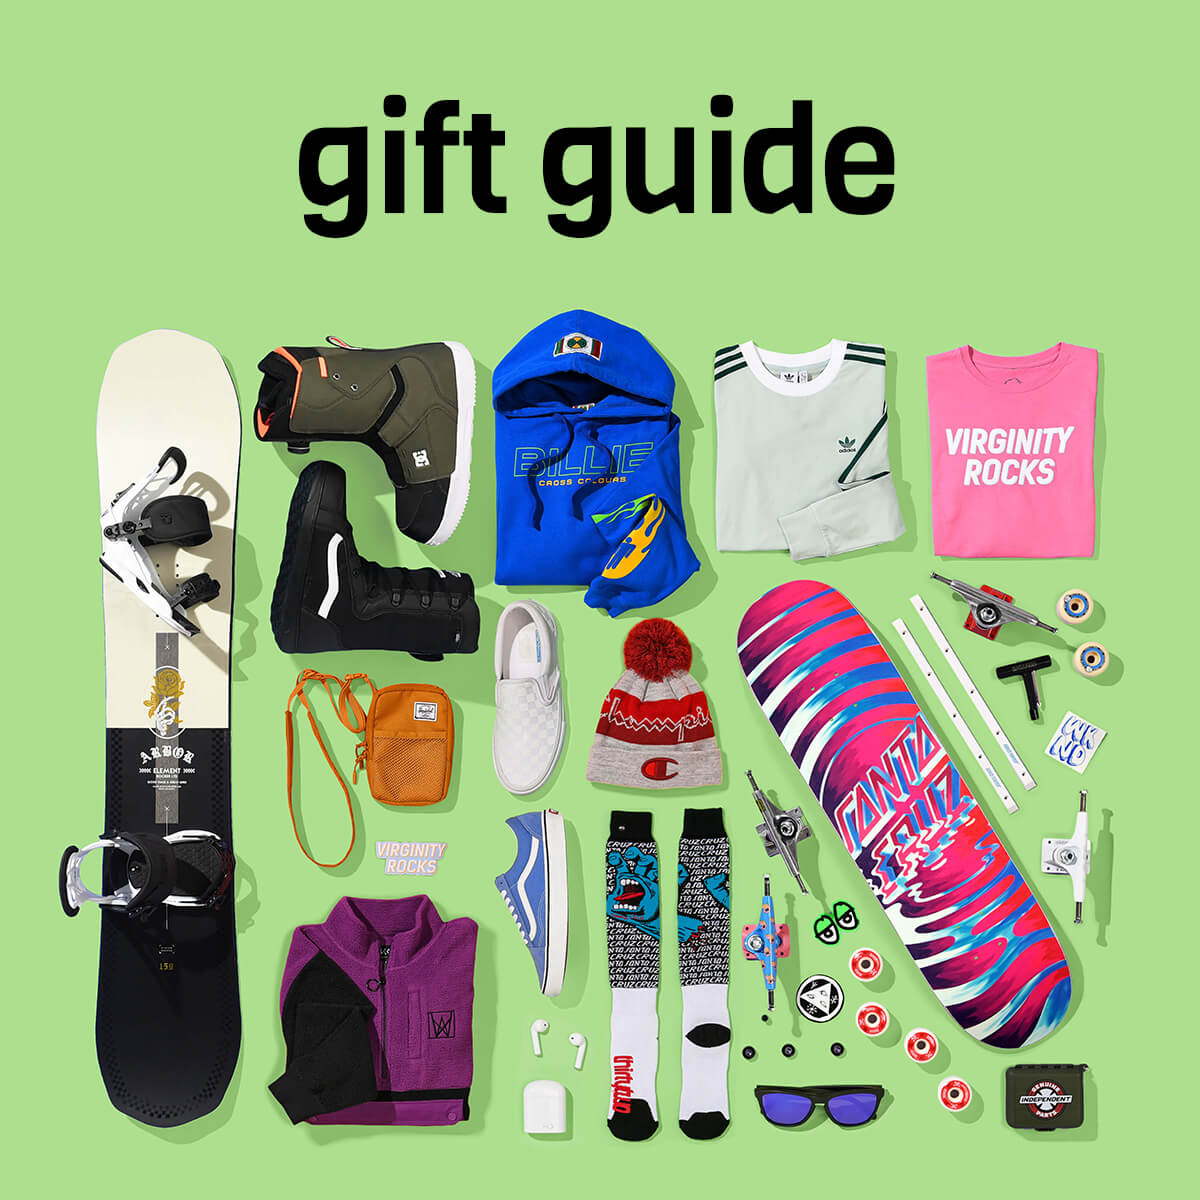 GIFTS FOR EVERYONE ON YOUR LIST - THERE'S STILL TIME